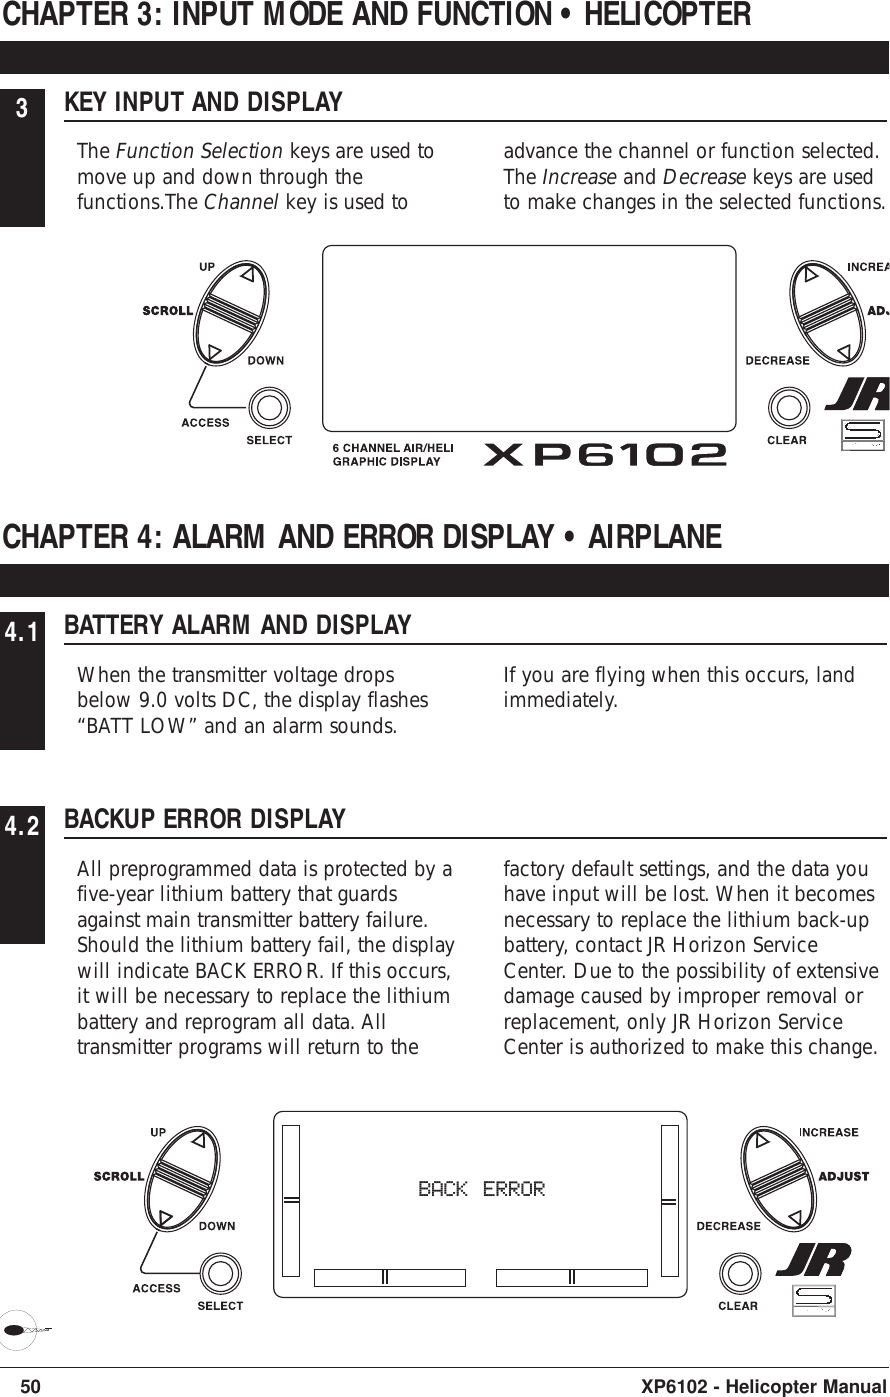 50 XP6102 - Helicopter Manual3KEY INPUT AND DISPLAYThe Function Selection keys are used tomove up and down through thefunctions.The Channel key is used toadvance the channel or function selected.The Increase and Decrease keys are usedto make changes in the selected functions.CHAPTER 3: INPUT MODE AND FUNCTION • HELICOPTER4.1 BATTERY ALARM AND DISPLAYWhen the transmitter voltage dropsbelow 9.0 volts DC, the display flashes“BATT LOW” and an alarm sounds.If you are flying when this occurs, landimmediately.CHAPTER 4: ALARM AND ERROR DISPLAY • AIRPLANE4.2 BACKUP ERROR DISPLAYAll preprogrammed data is protected by afive-year lithium battery that guardsagainst main transmitter battery failure.Should the lithium battery fail, the displaywill indicate BACK ERROR. If this occurs,it will be necessary to replace the lithiumbattery and reprogram all data. Alltransmitter programs will return to thefactory default settings, and the data youhave input will be lost. When it becomesnecessary to replace the lithium back-upbattery, contact JR Horizon ServiceCenter. Due to the possibility of extensivedamage caused by improper removal orreplacement, only JR Horizon ServiceCenter is authorized to make this change.BACK ERROR